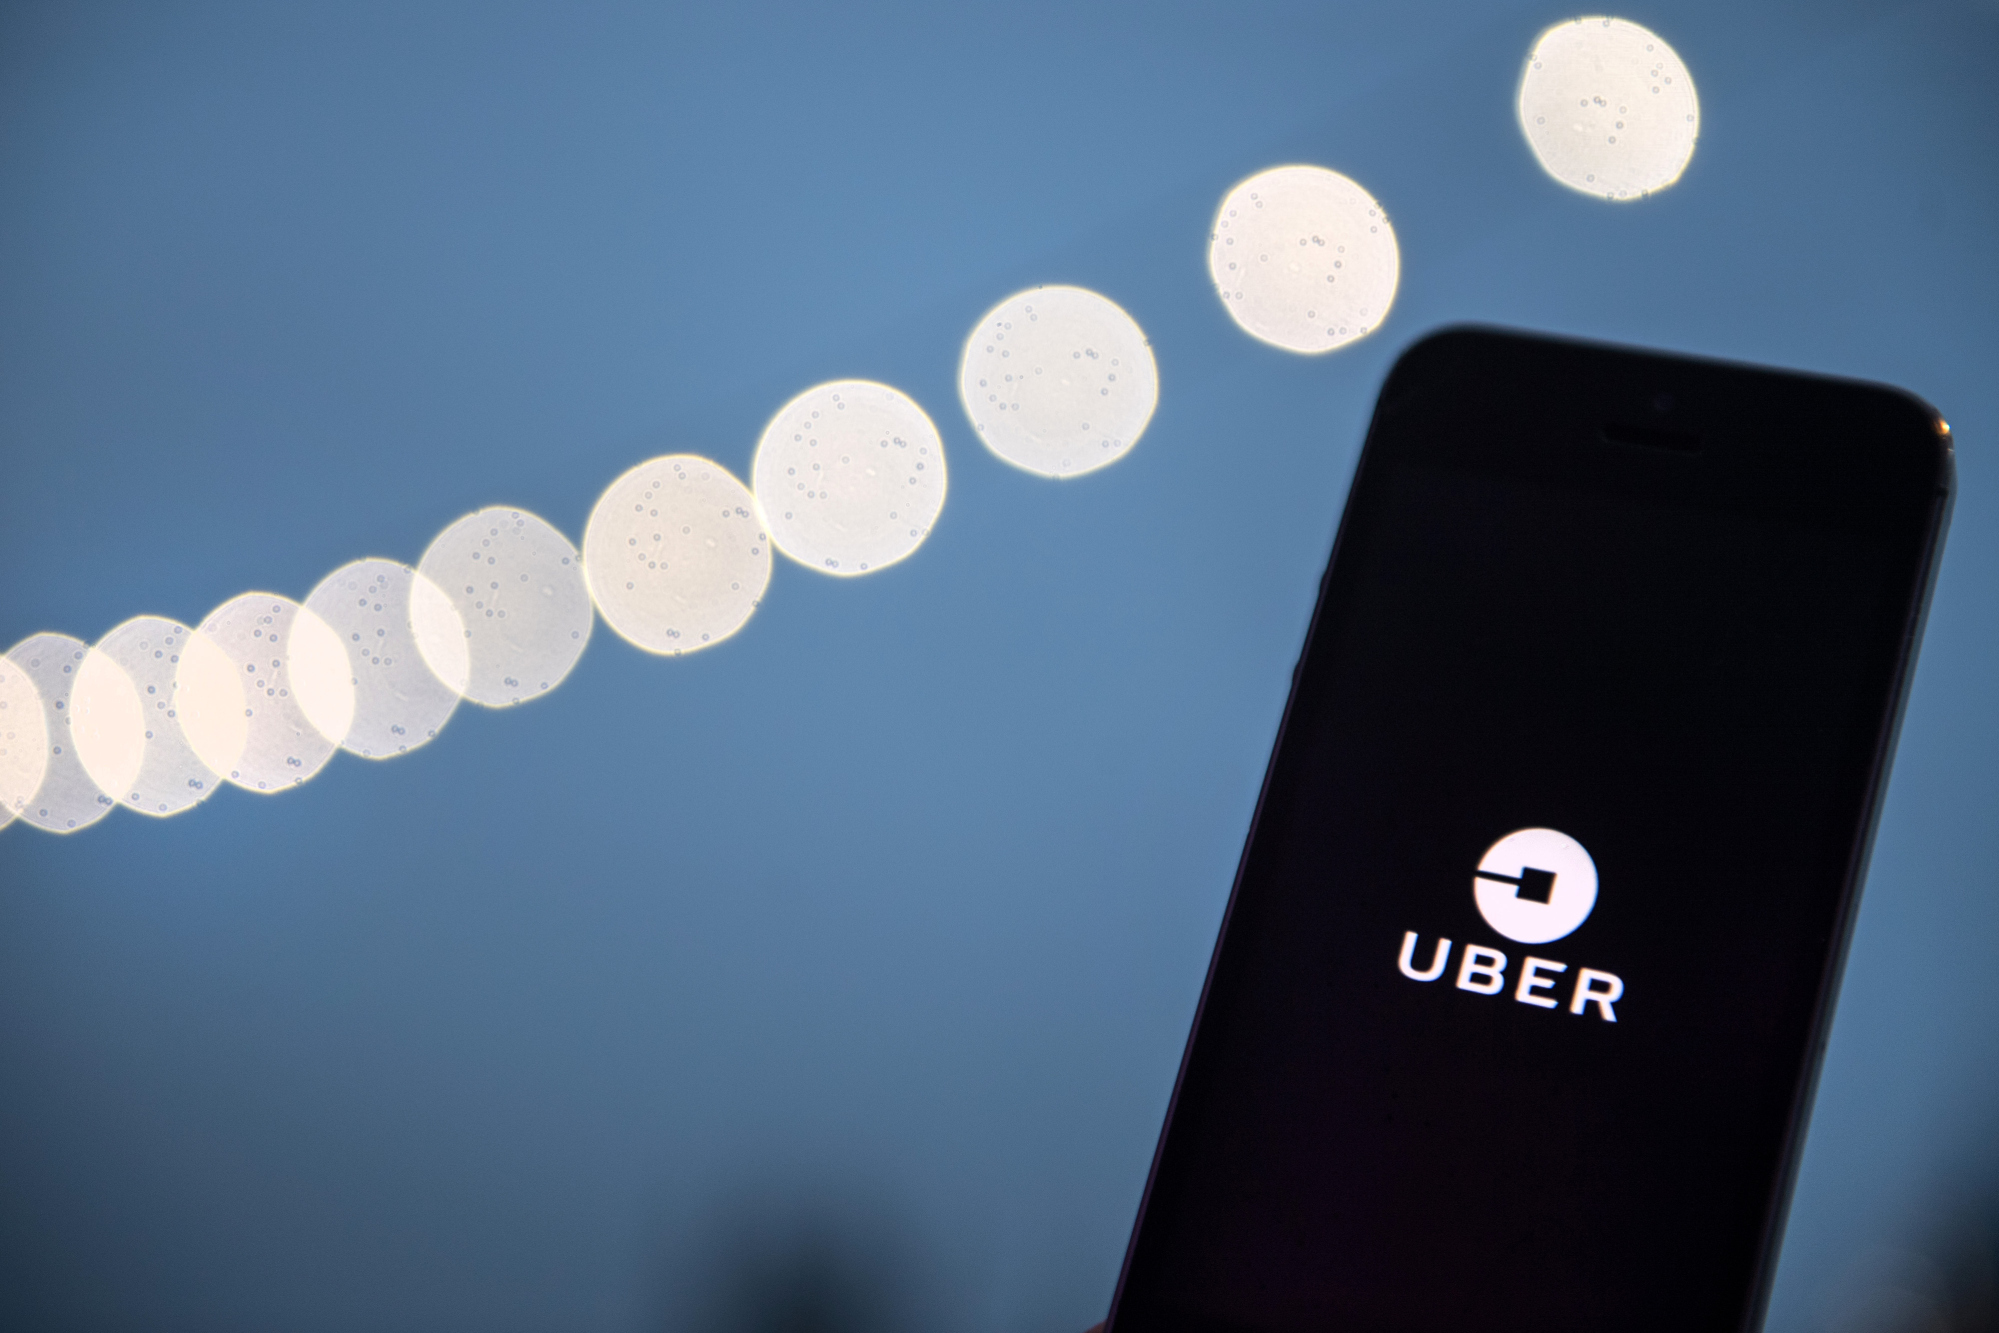 An Uber Technologies Inc. logo sits on a smartphone display in this arranged photograph in London, U.K.